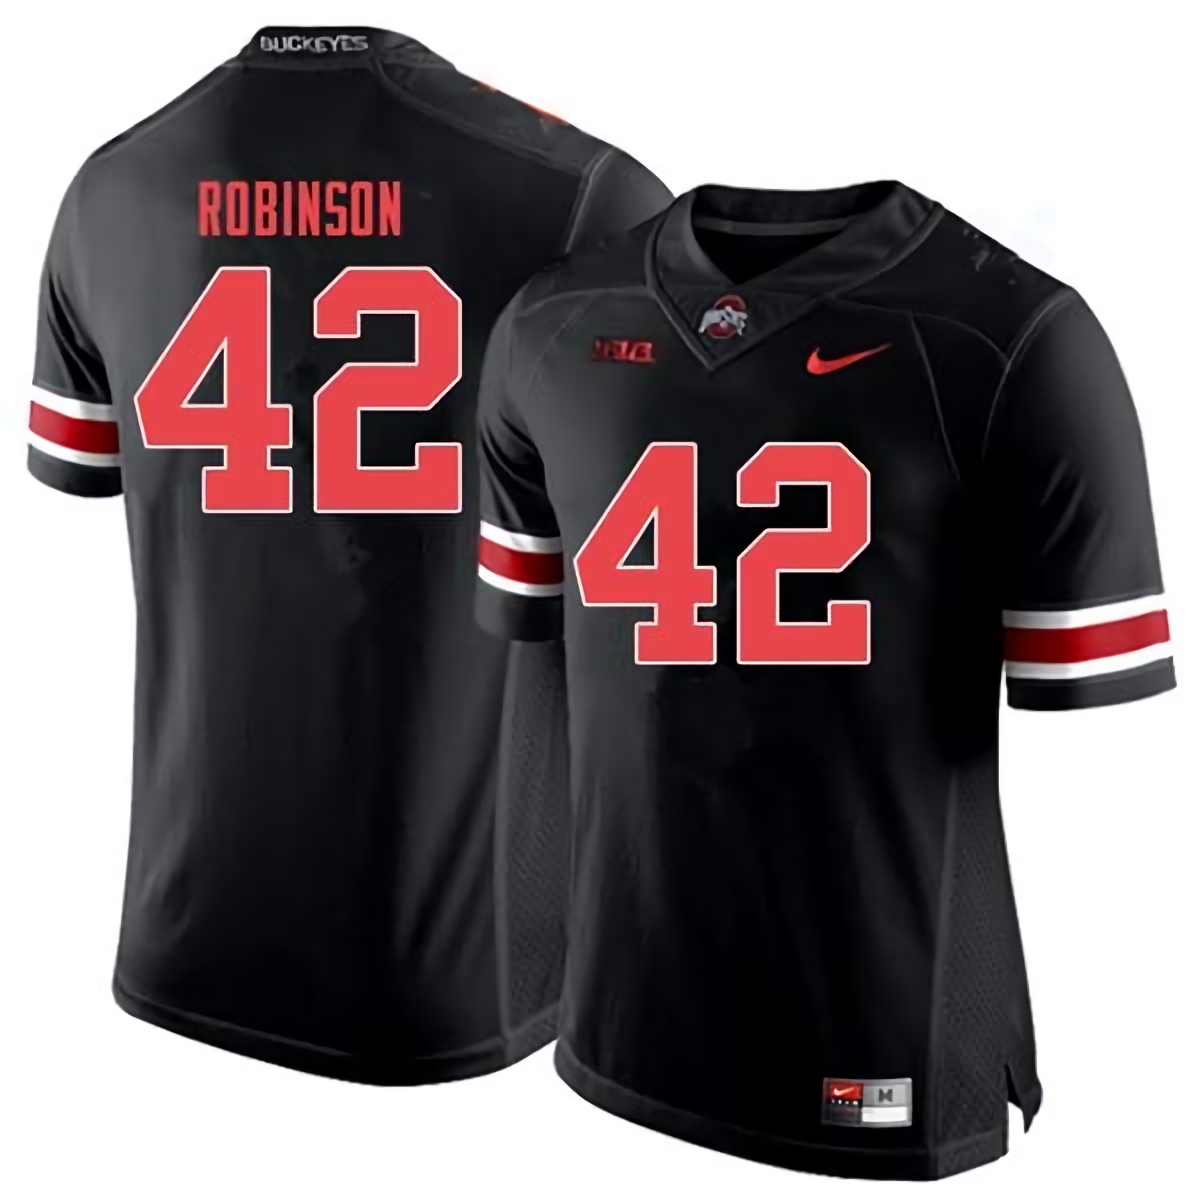 Bradley Robinson Ohio State Buckeyes Men's NCAA #42 Nike Black Out College Stitched Football Jersey RMZ7656CE